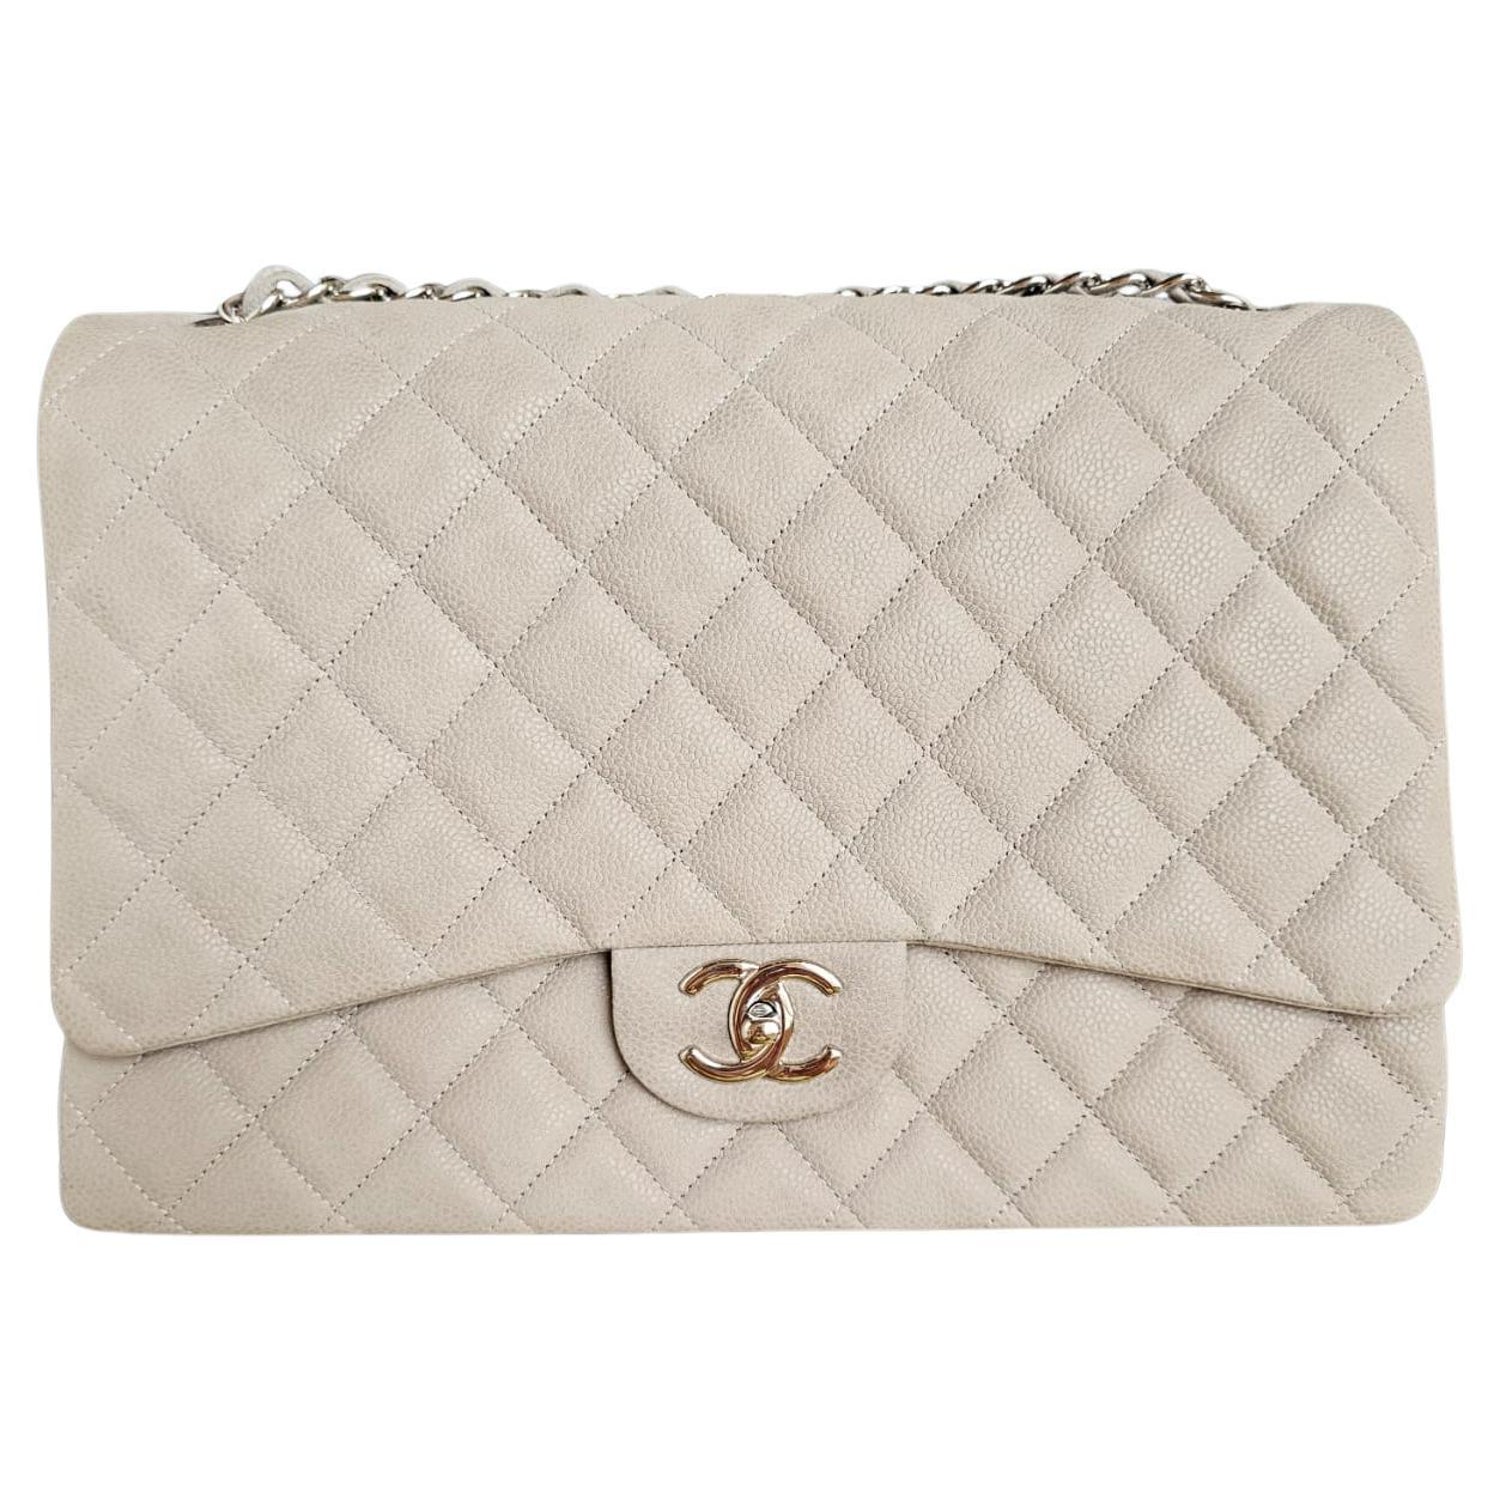 Designer Bags: Entry Level Bags & Their Cons (Chanel Classic Flap Small,  Medium/Large, Jumbo, Maxi) 